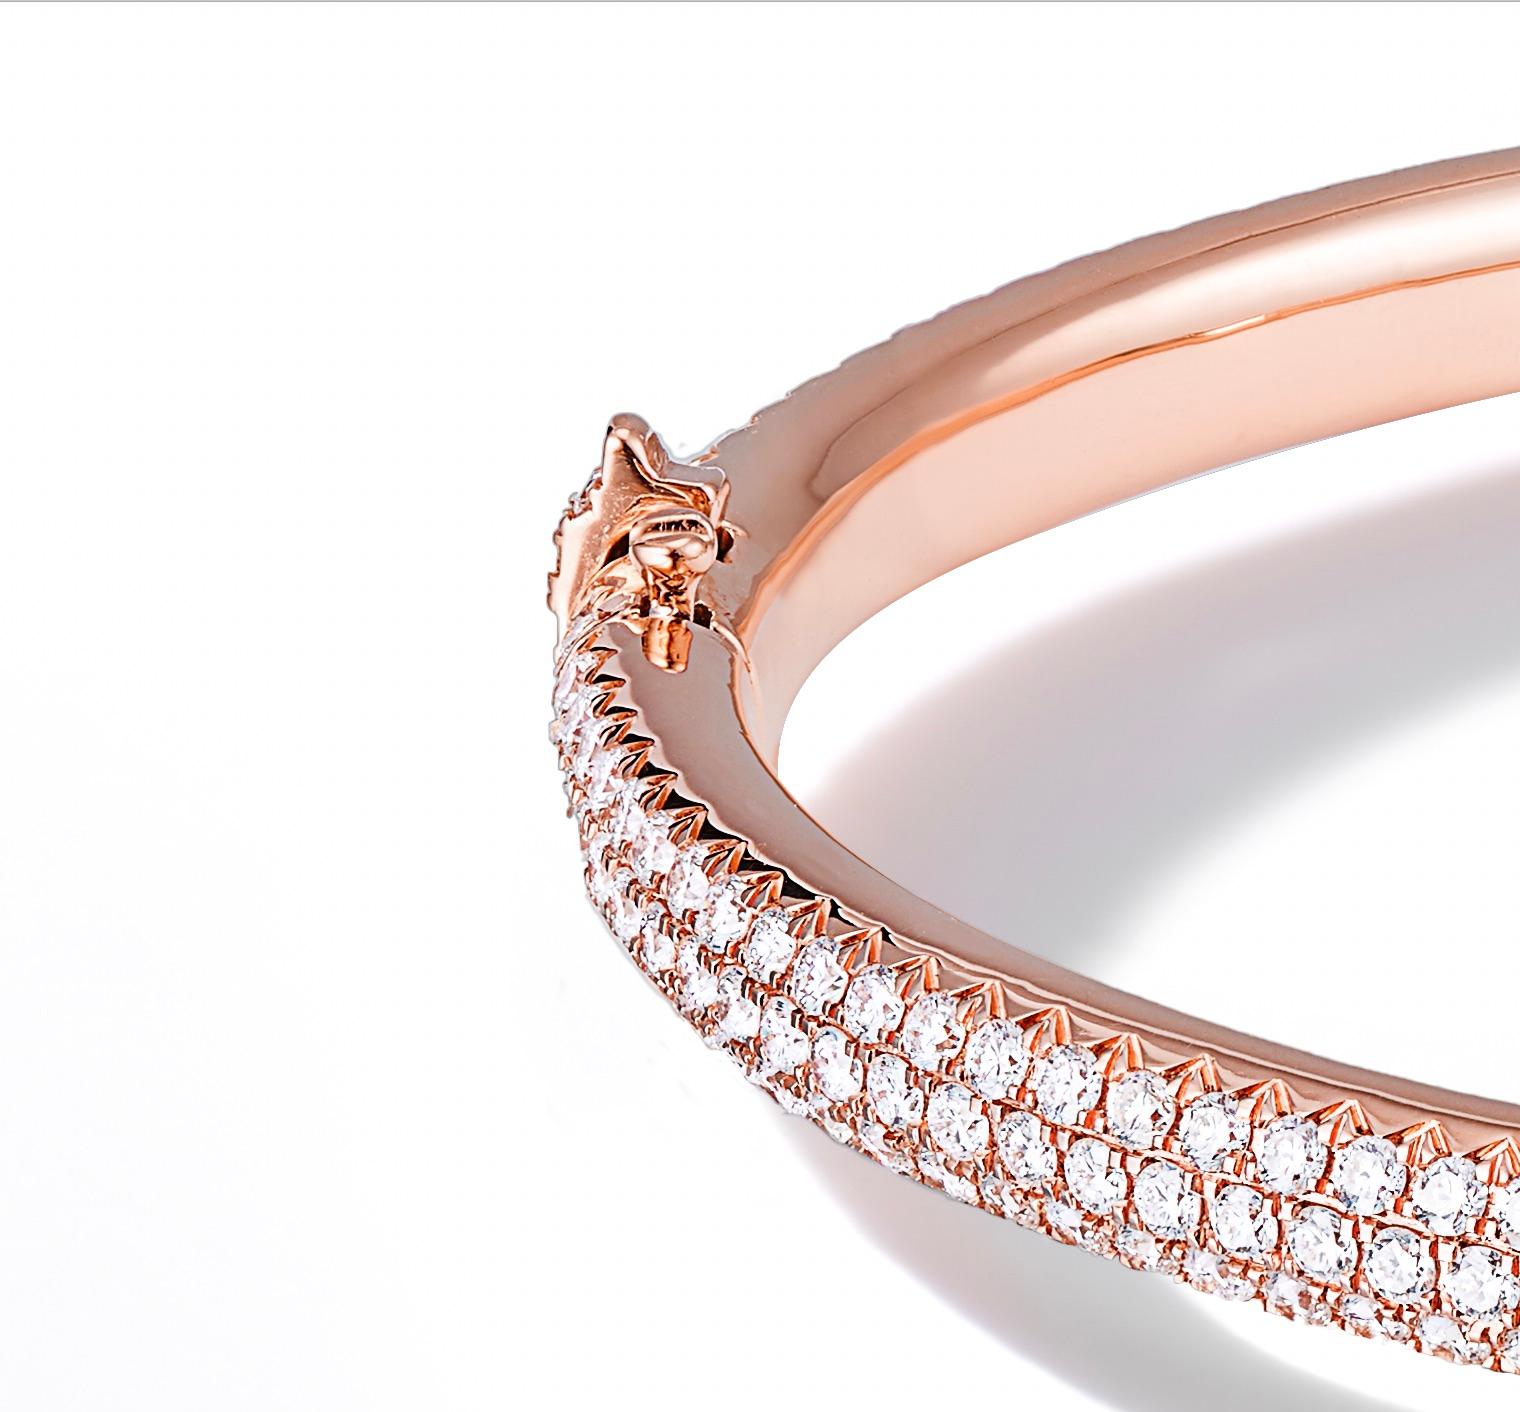 64Facets 2.75 Carat Pave Diamond Bangle Bracelet Set in 18 Karat Rose Gold In New Condition For Sale In Los Angeles, CA